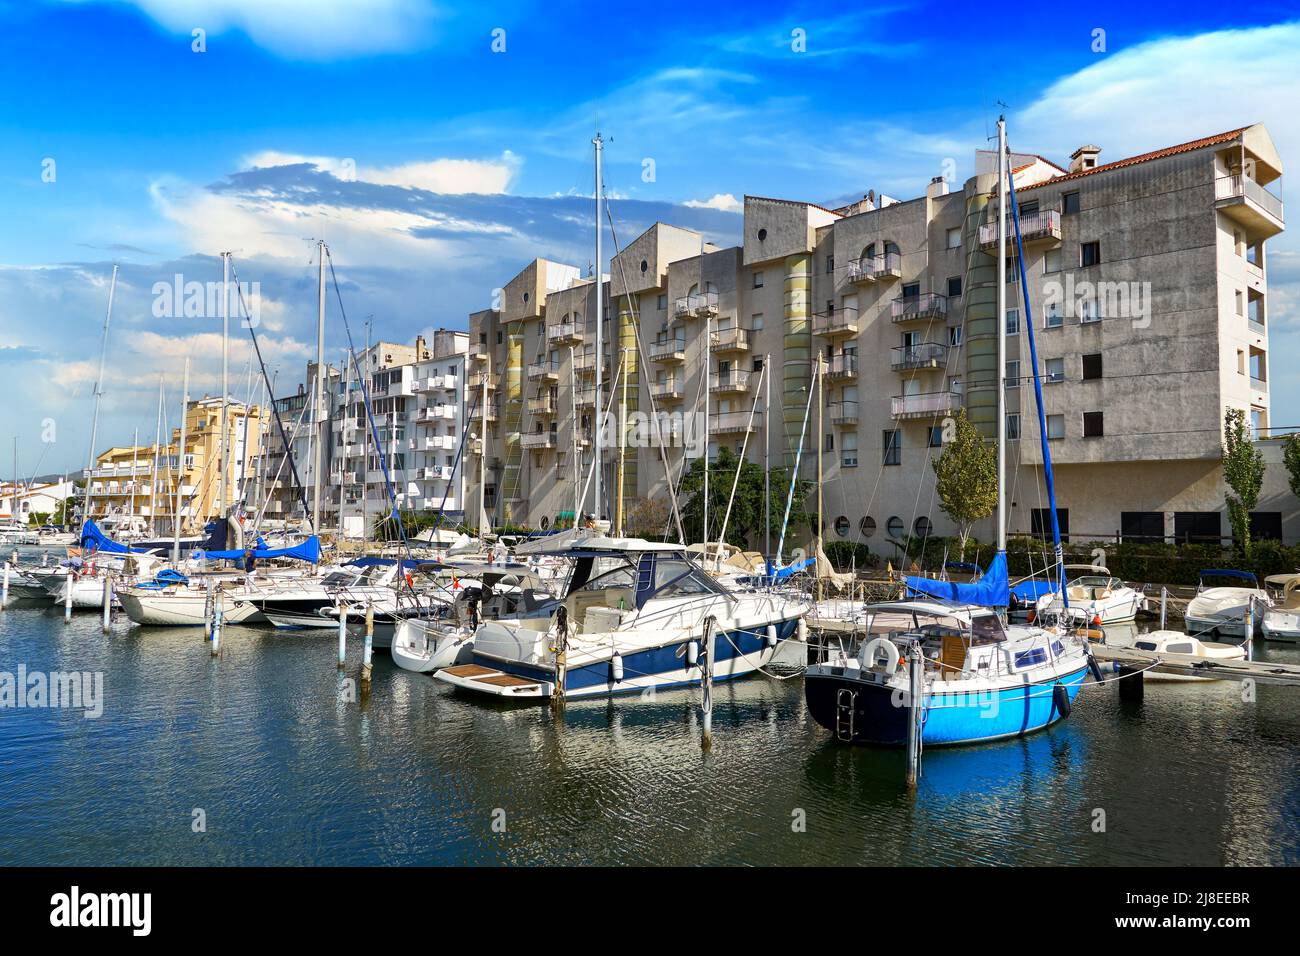 Beautiful view of the pier with boats, yachts and a high-rise building on the shores of the picturesque Mediterranean canal in the Golf de Roses again Stock Photo